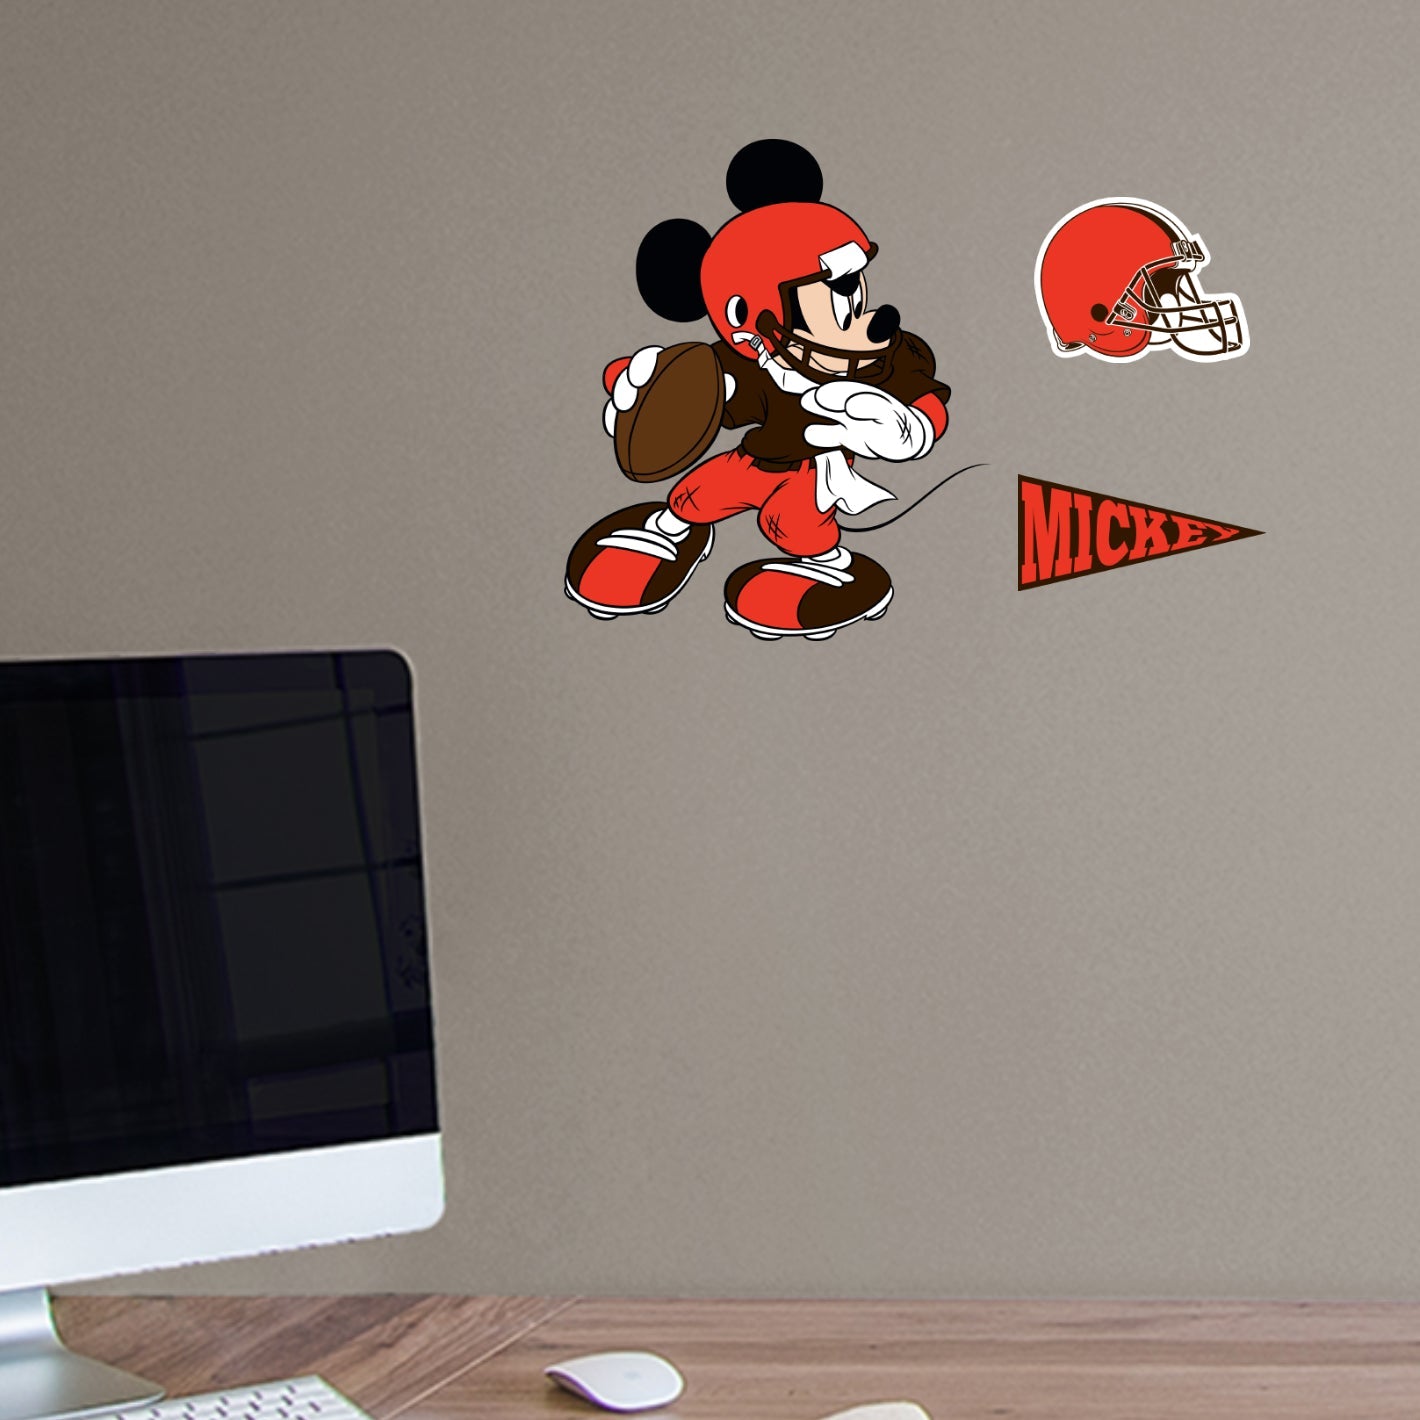 Cleveland Browns: Mickey Mouse - Officially Licensed NFL Removable Adhesive Decal